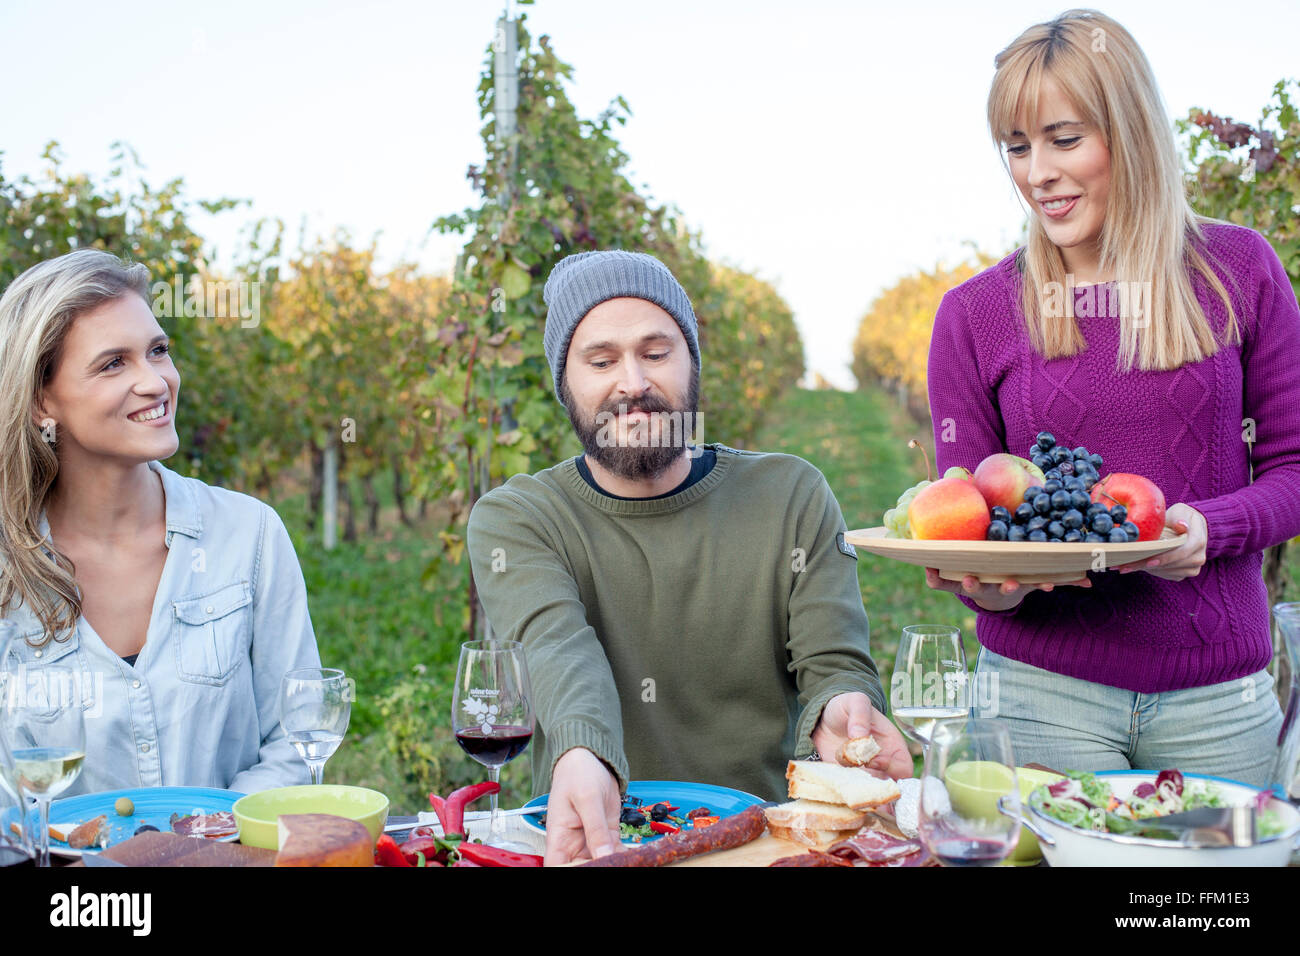 Group of friends on garden party with vineyard in background Stock Photo